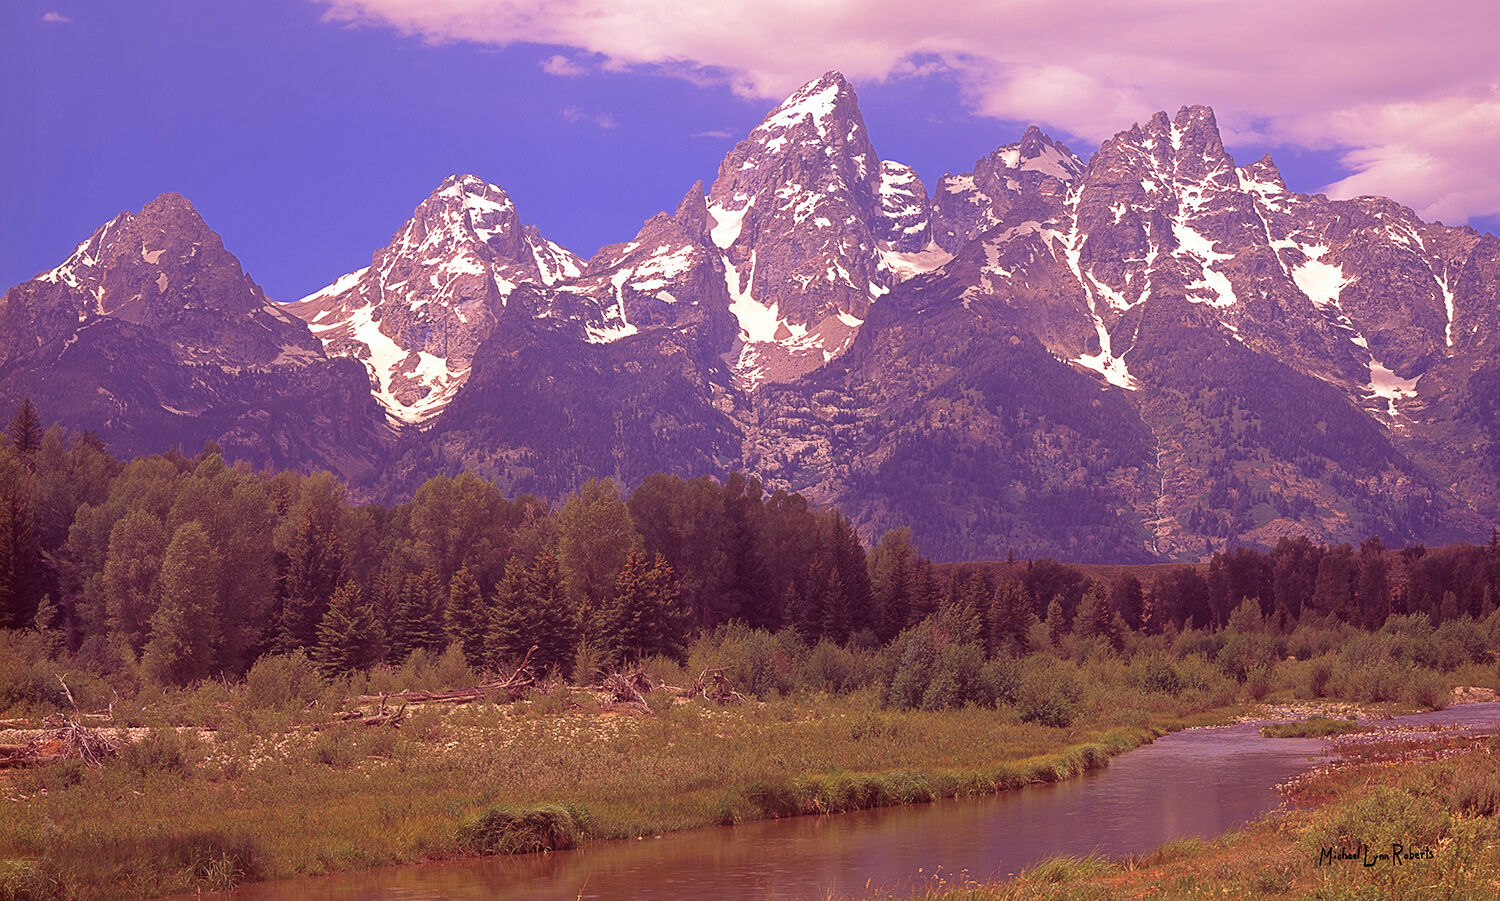 Teewinot Mountain (left), Grand Teton (middle), and Mount Owen (right) rise dramatically above the Jackson Hole valley, bringing...